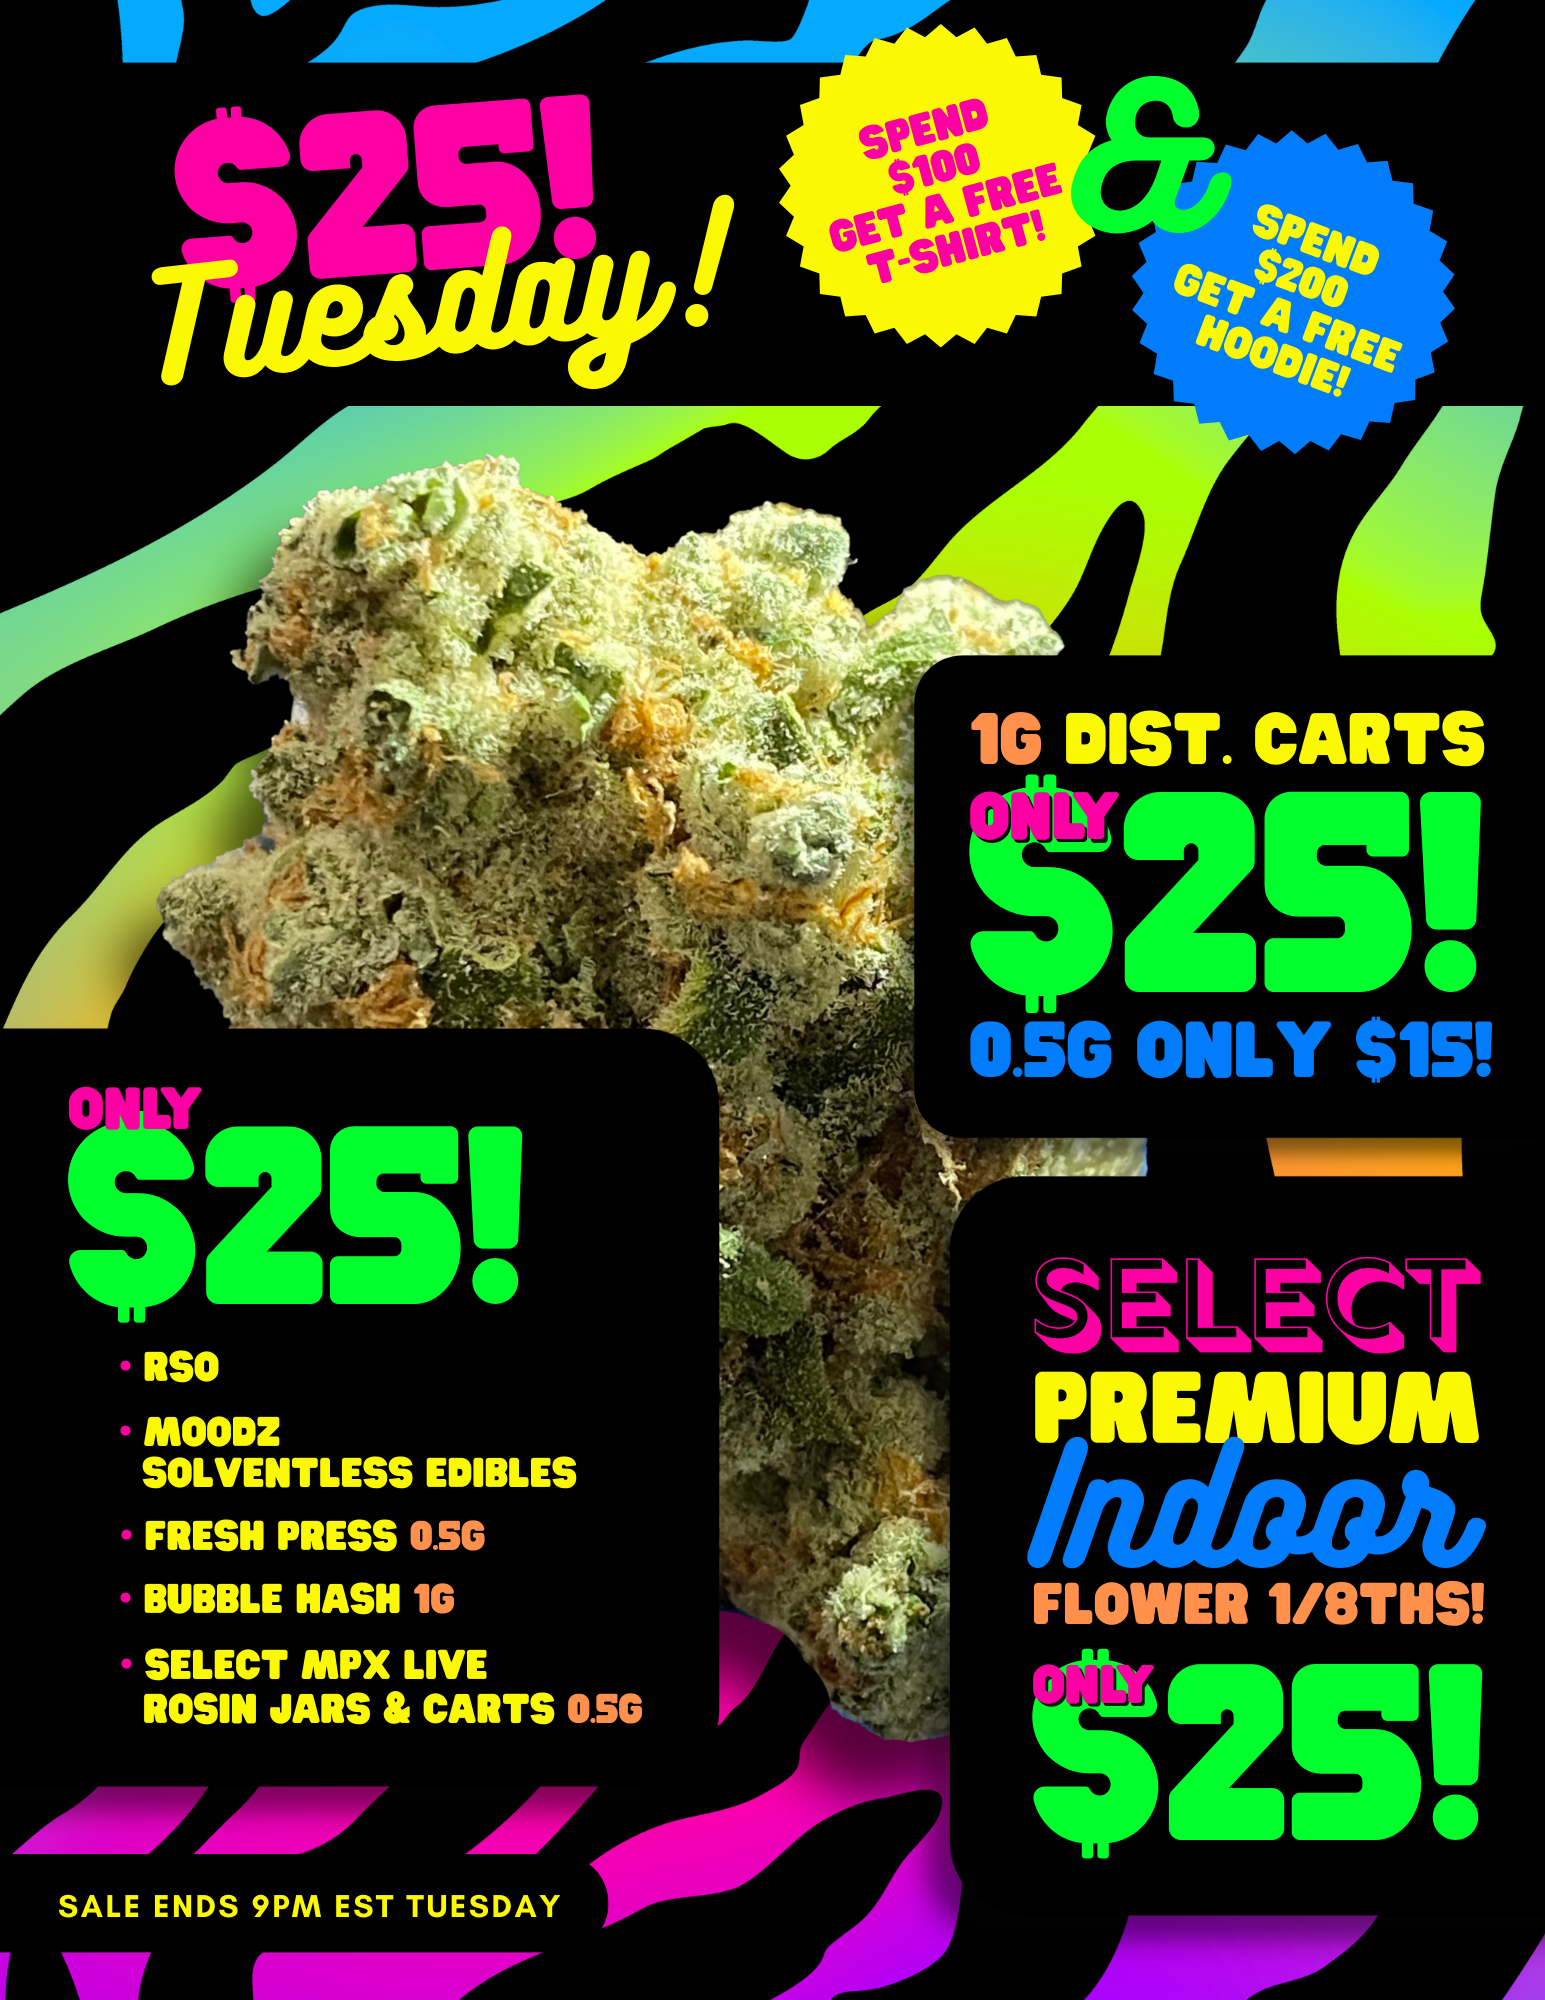 1.23 TUES PROMO PM EMAIL